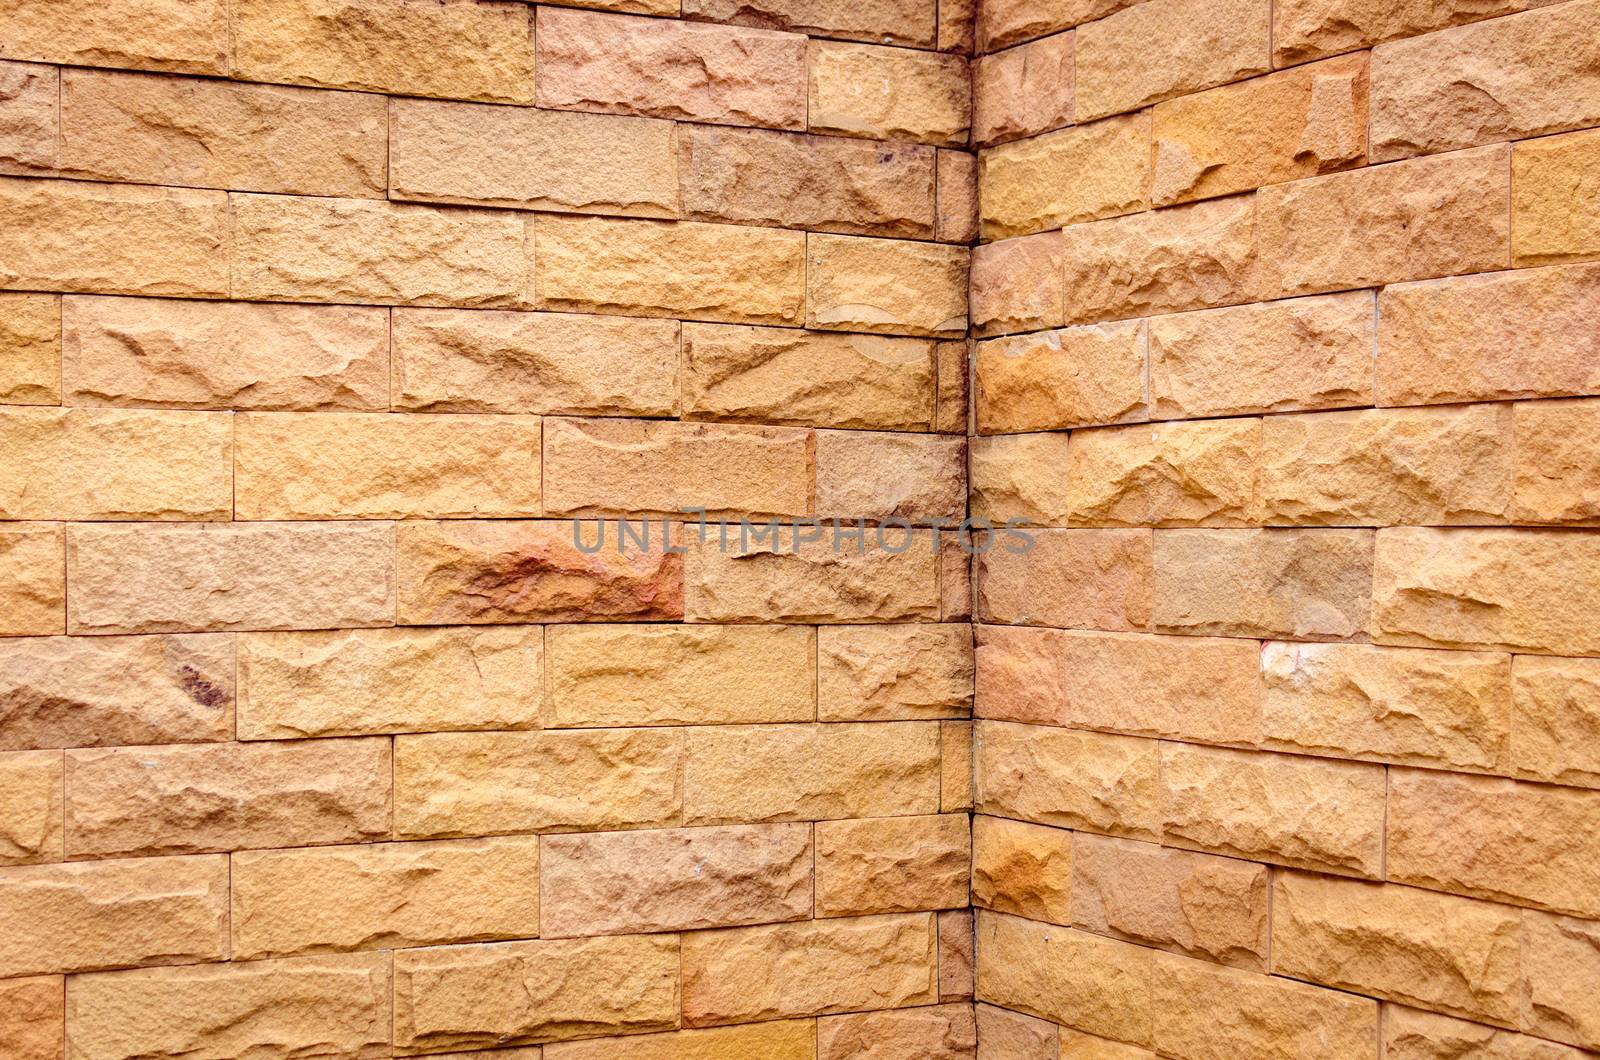 A brick wall in different natural orange tones by nop16